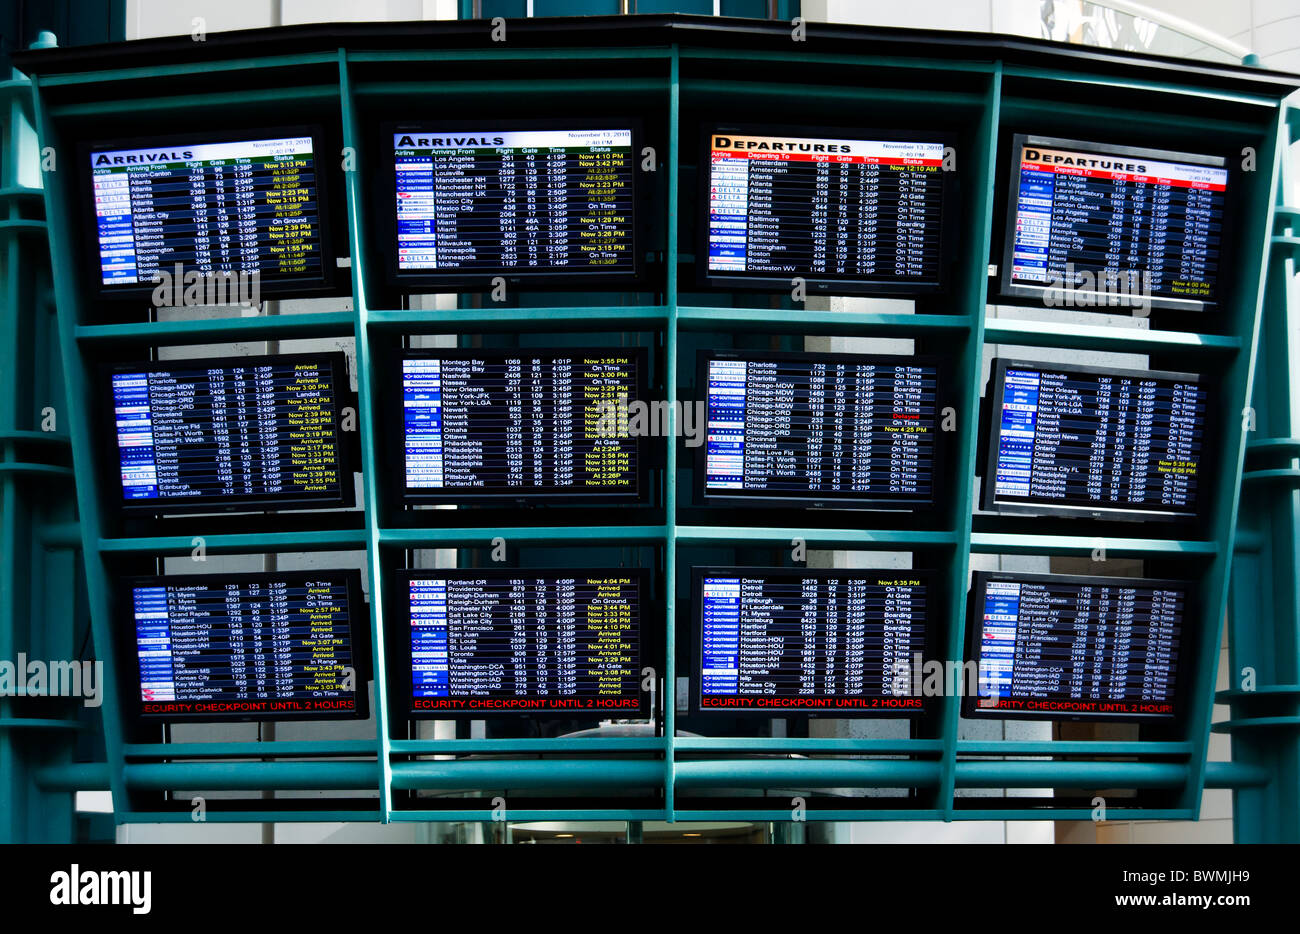 Flight Arrivals and Departures boards at Orlando International Airport, Florida, USA Stock Photo